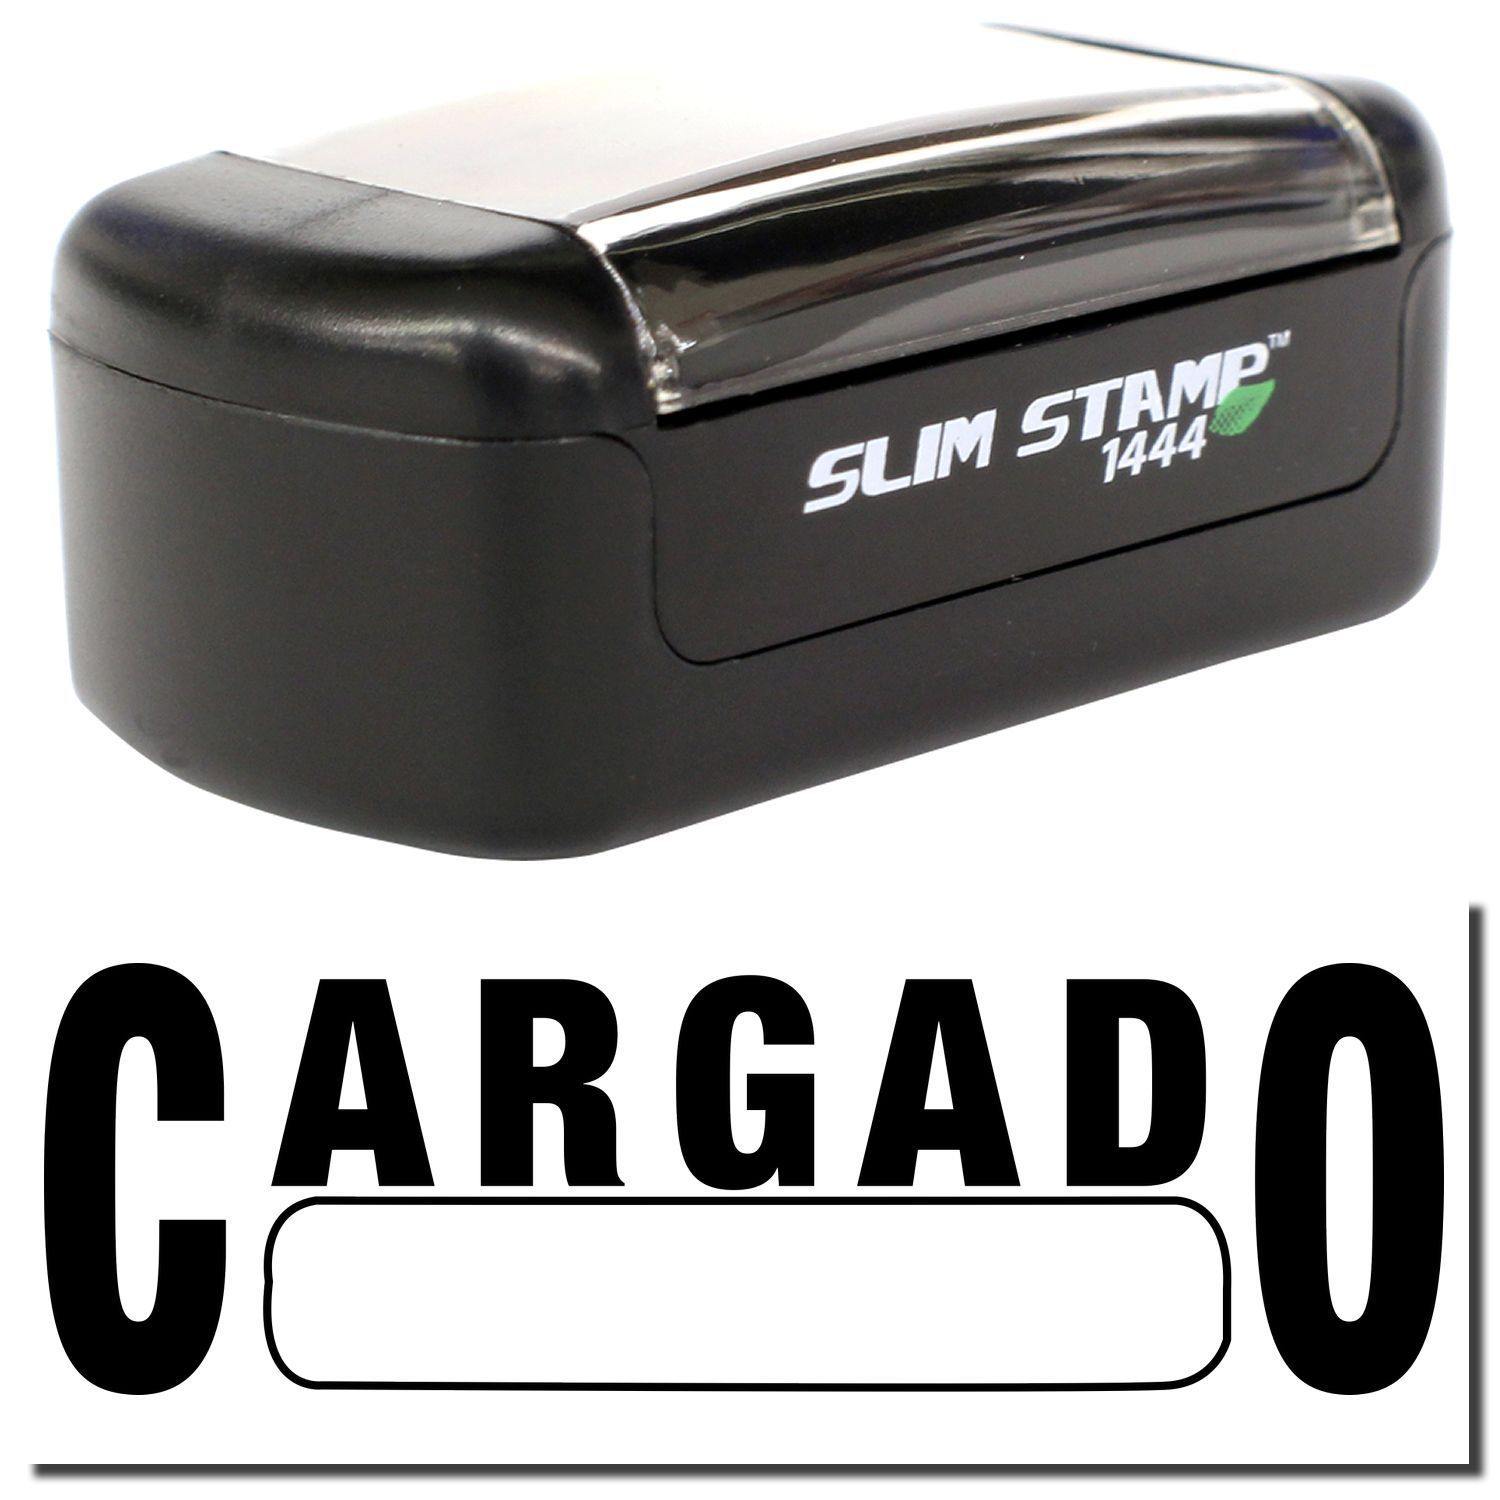 A stock office pre-inked stamp with a stamped image showing how the text "CARGADO" with a box is displayed after stamping.